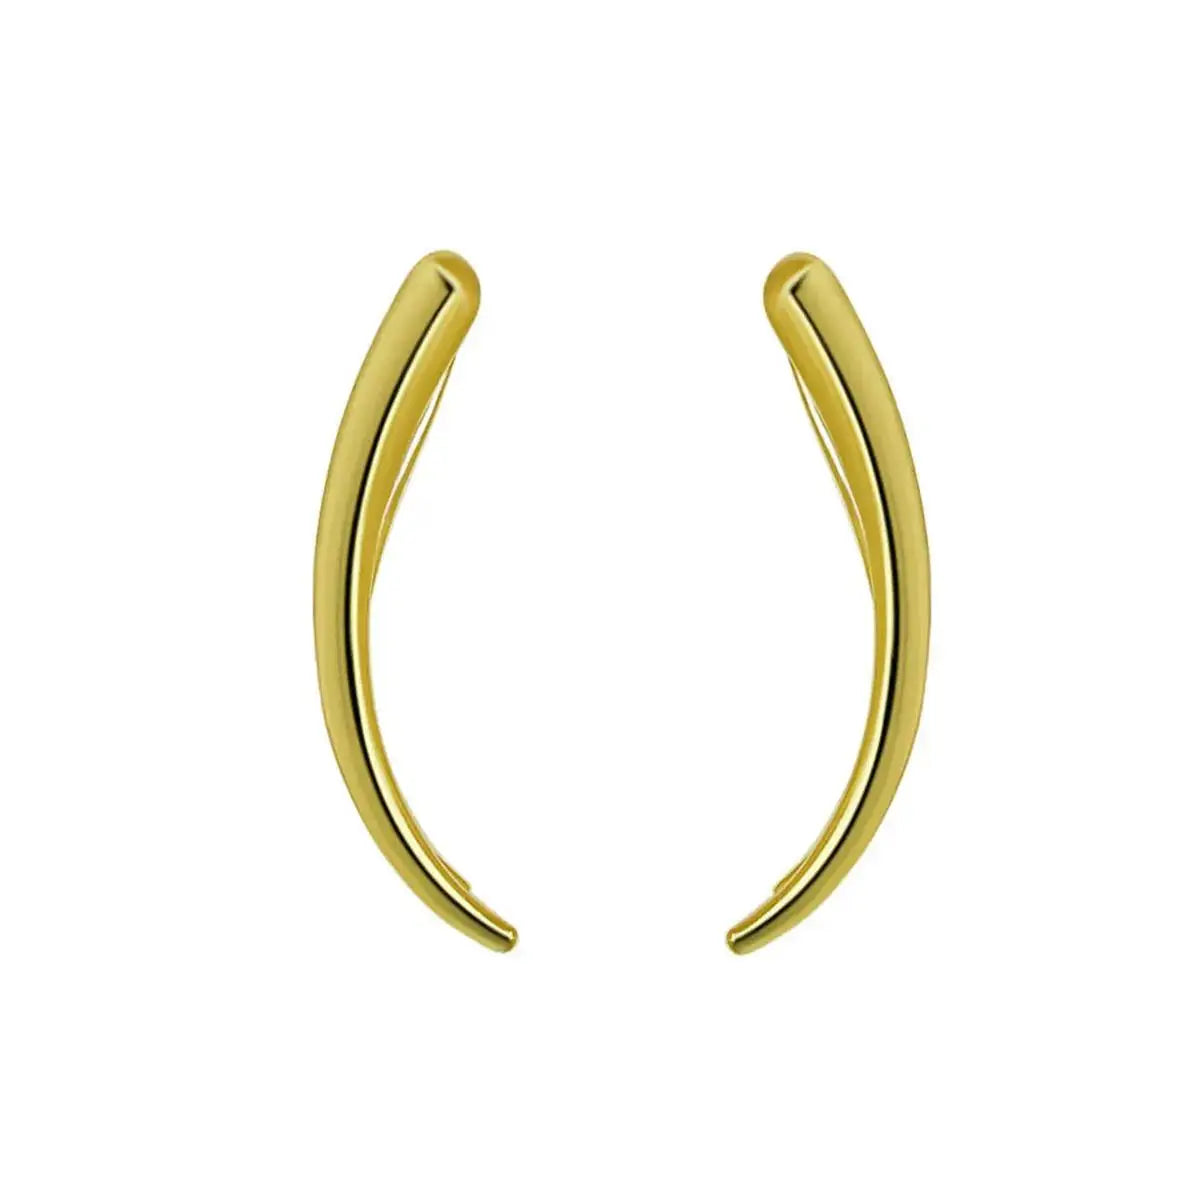 Curved Earrings - ÉclatMystique